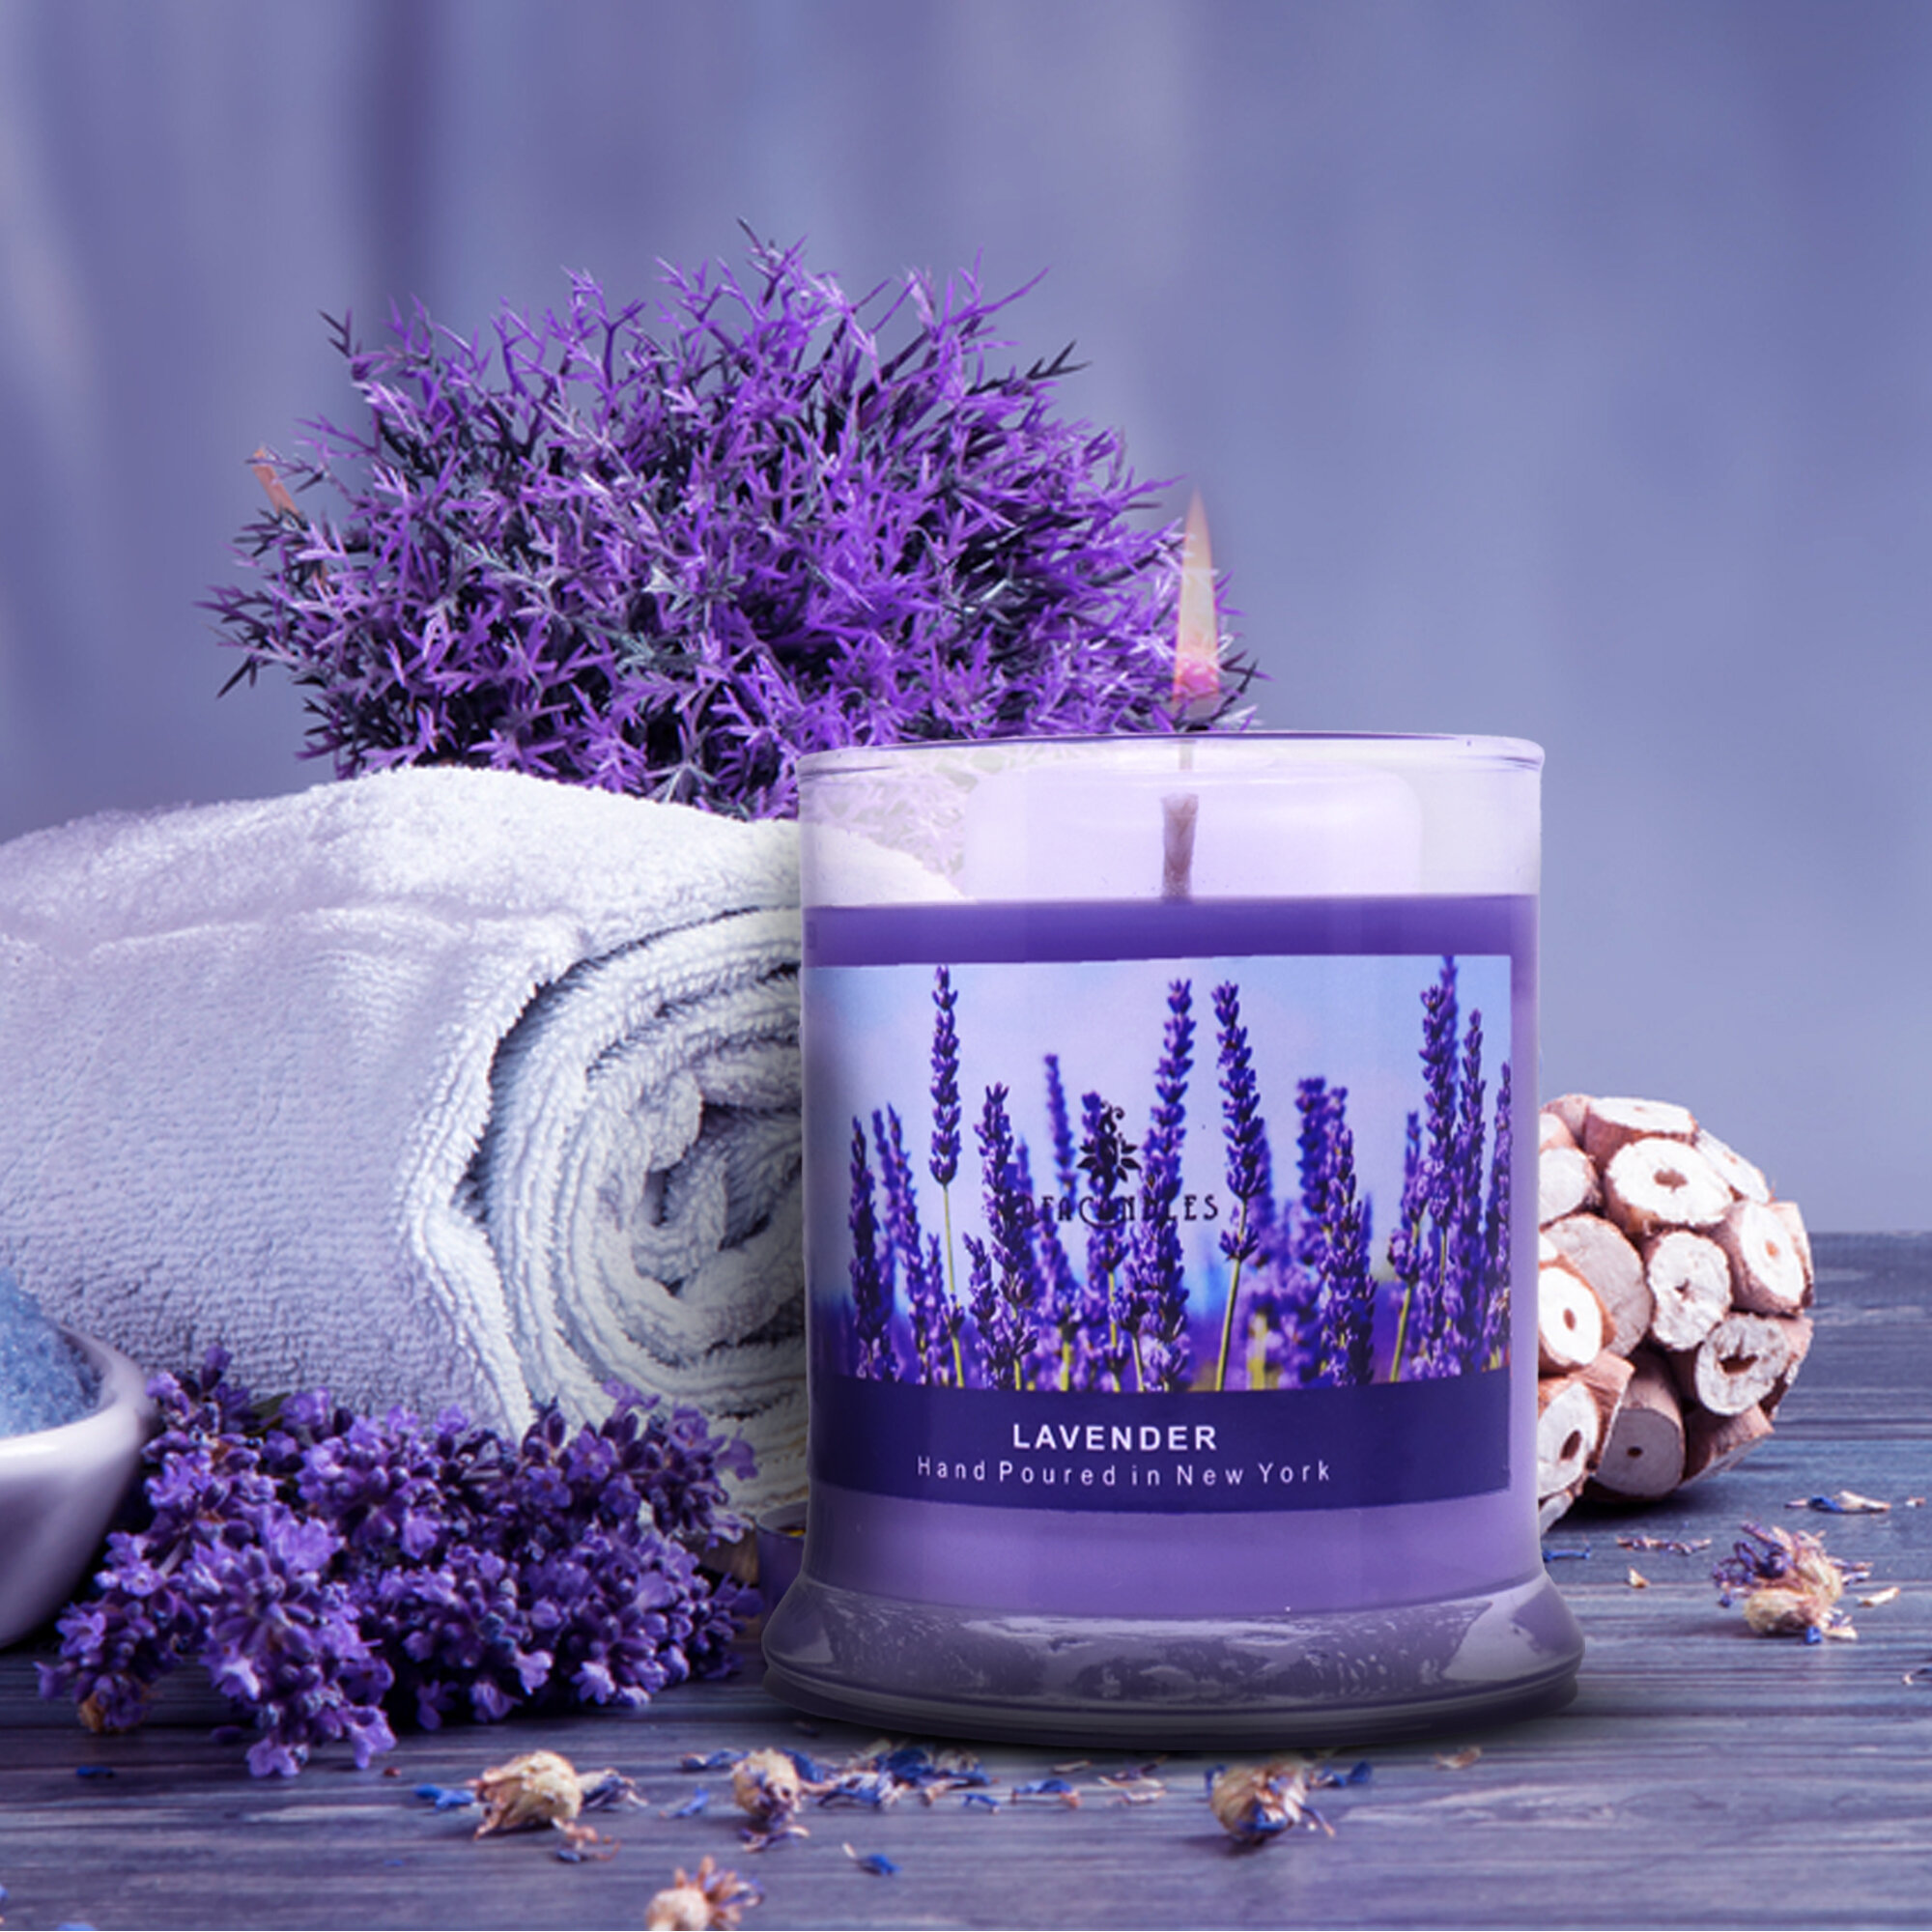 Soy Candle Floral  Candle with Lavender Holiday Candle Pillar candle Botanical Candle with Case Luxury Candle Lavender Candle